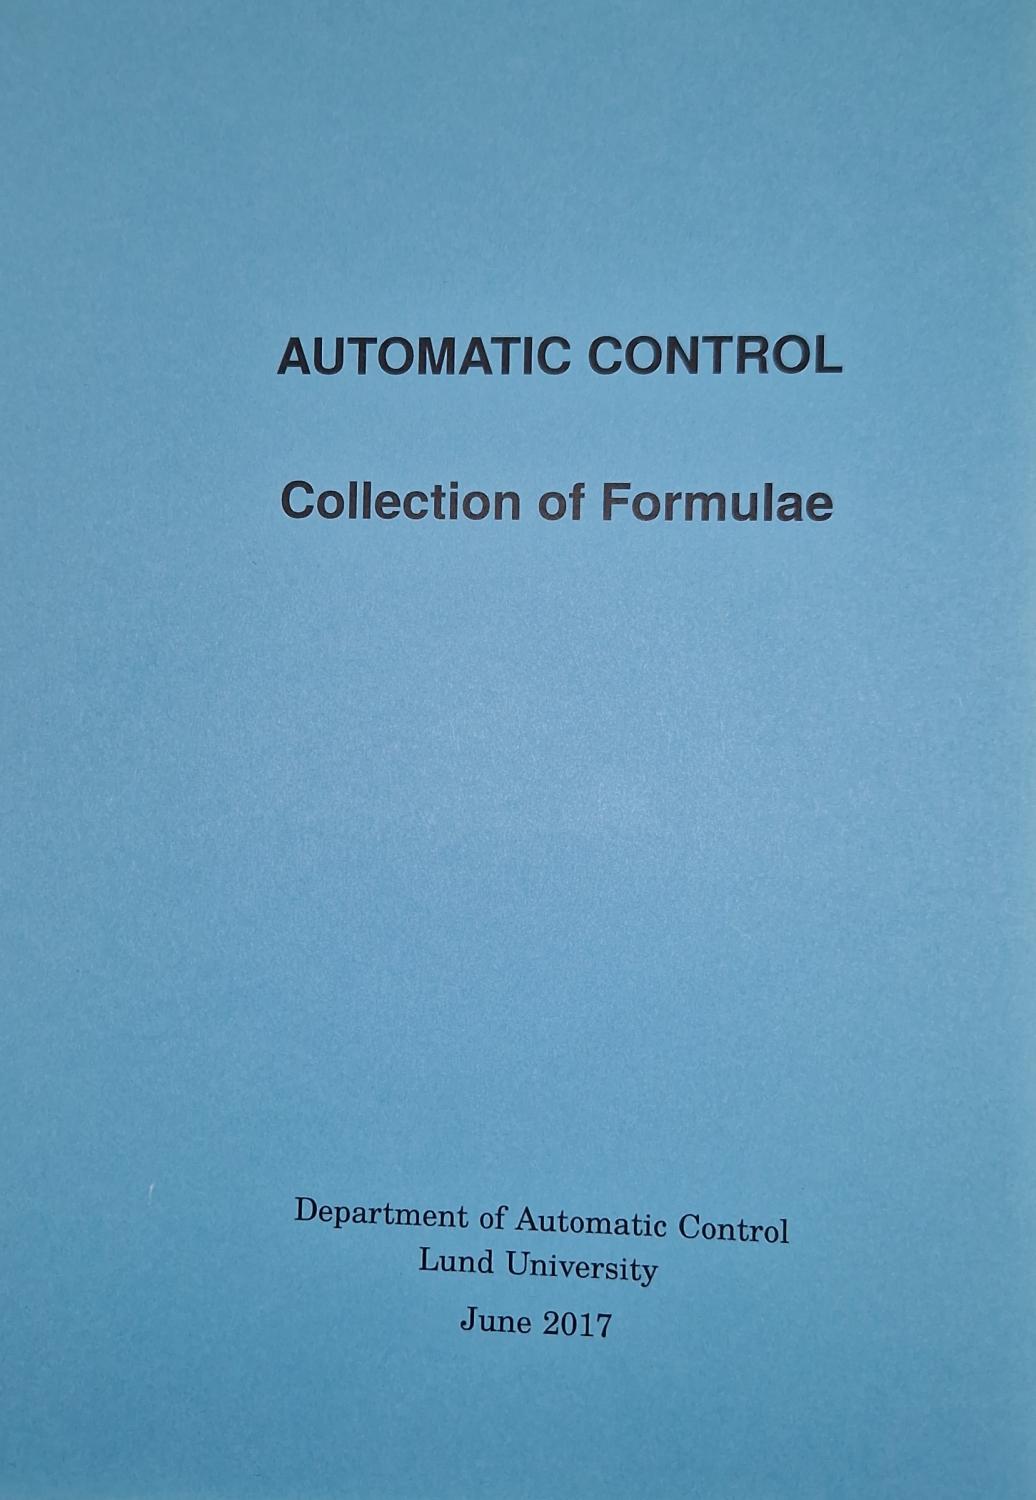 Automatic Control, Collection of Formulae, 2017